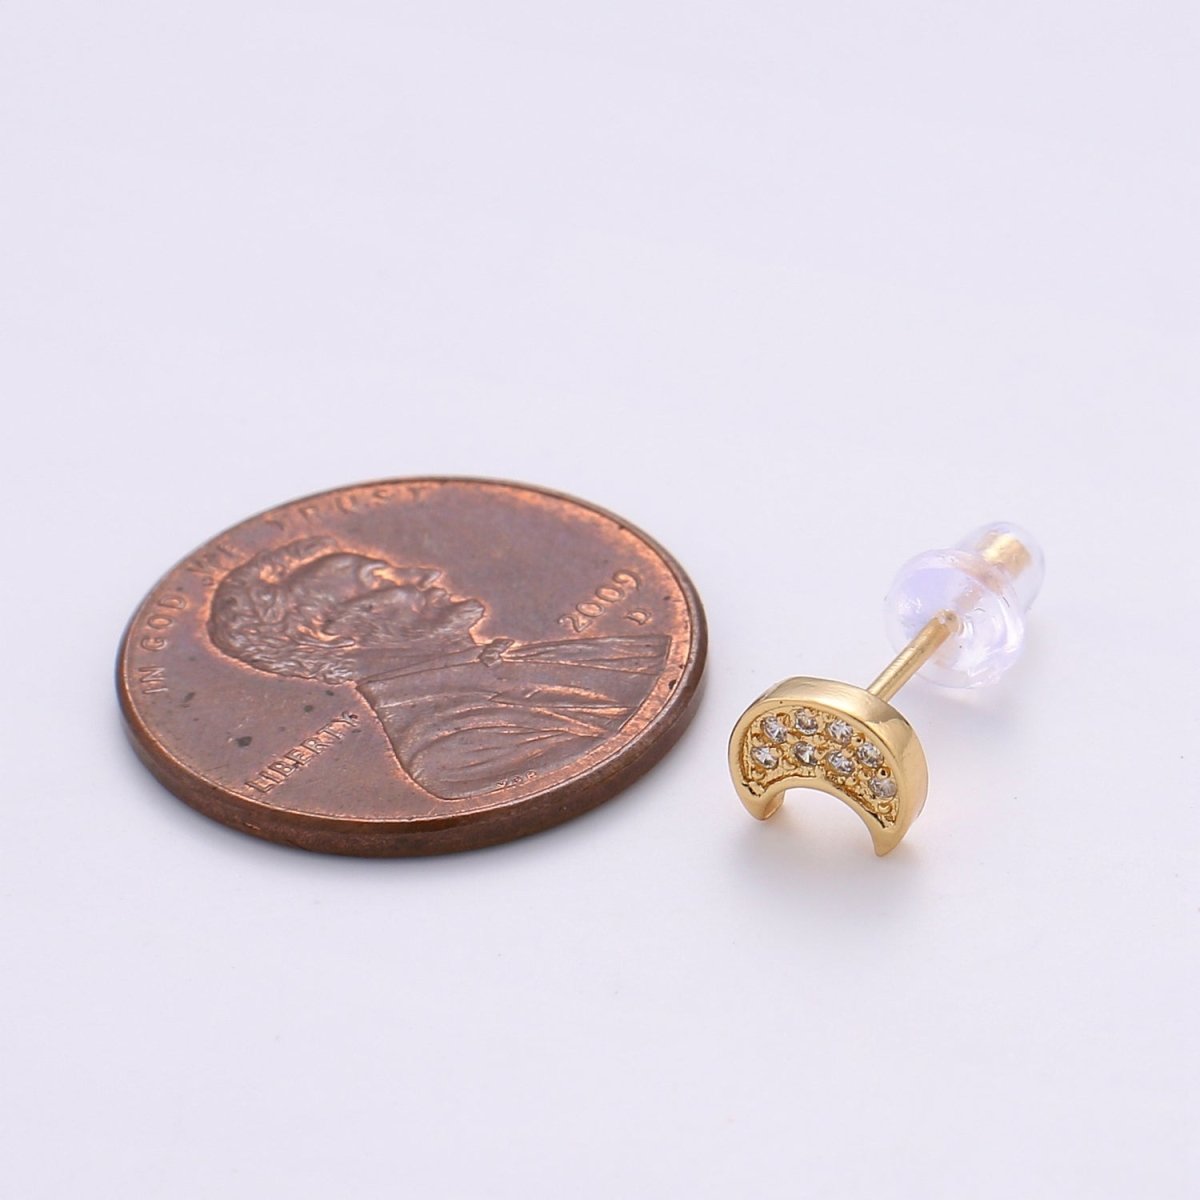 Moon Stud Earring Charm • 24k Gold Filled• Jewelry Making Supplies • Open Ring Attached for Jewelry Making Supply Q-293 - DLUXCA